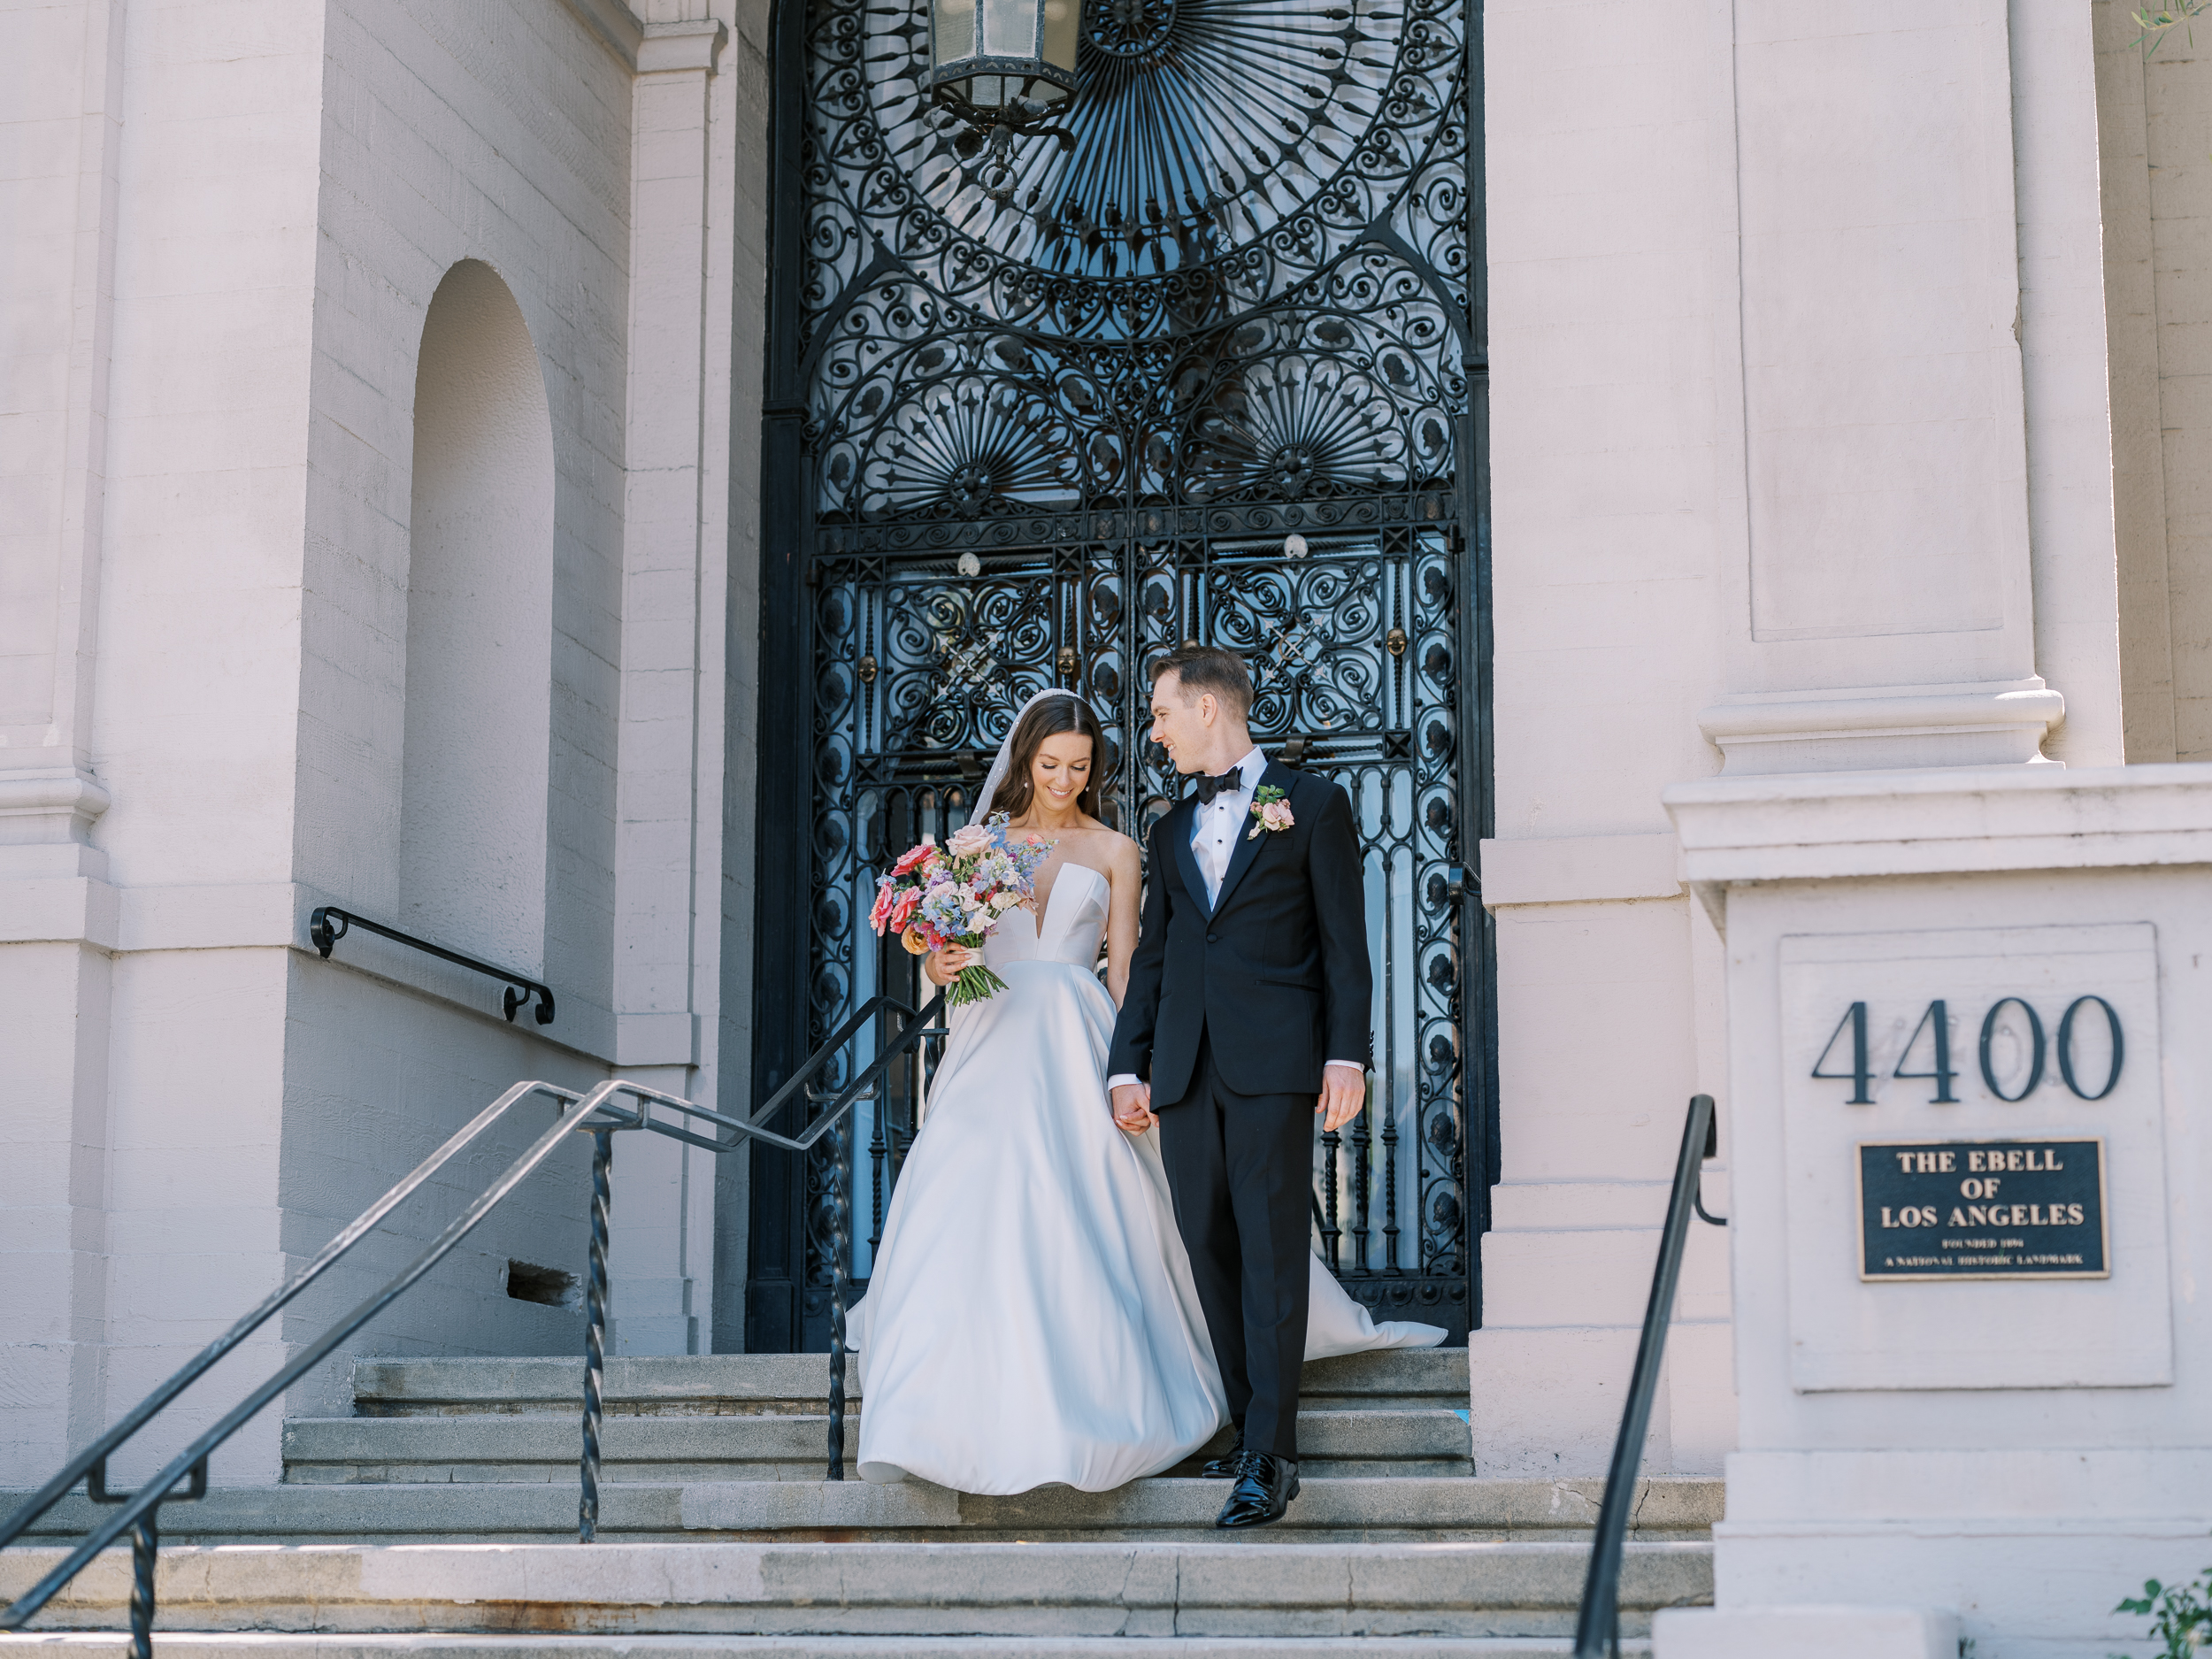 ebell los angeles wedding 2022 bride and groom on steps at entrance